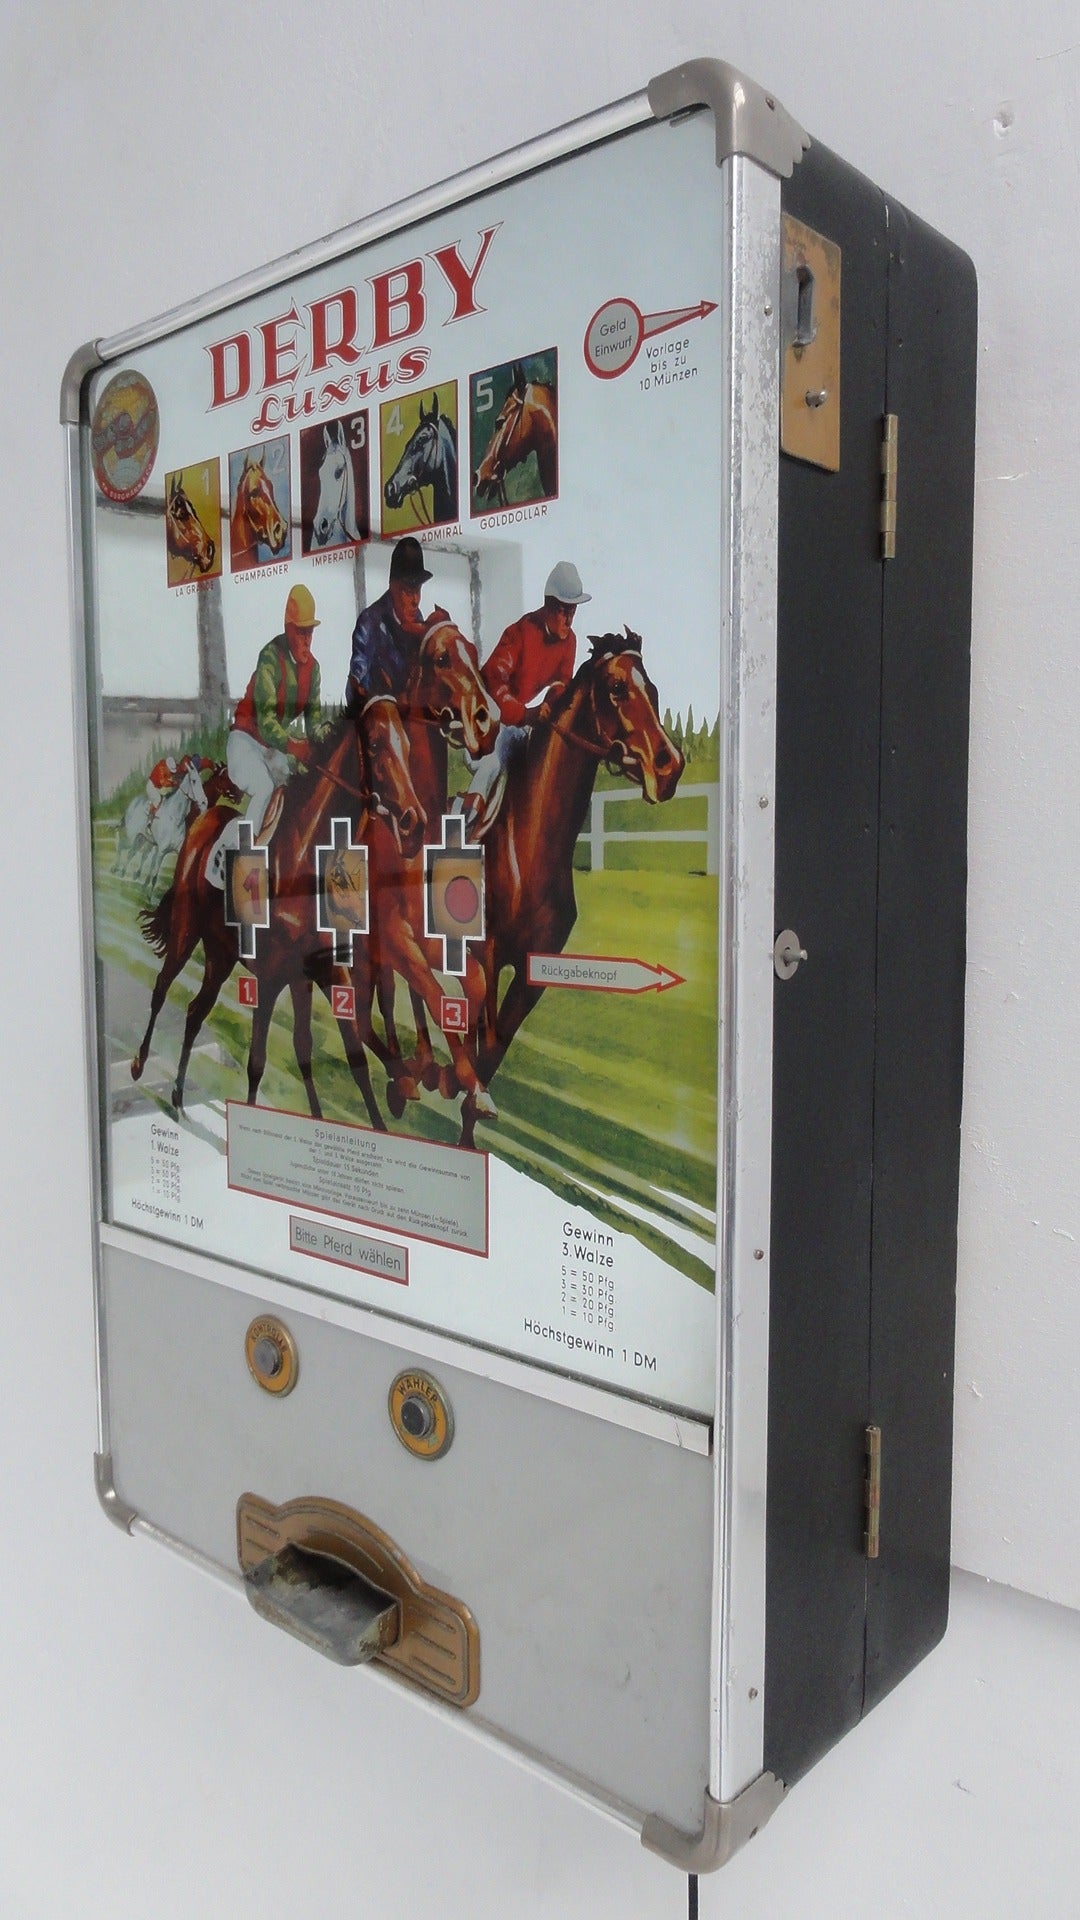 A very rare and fully working German coin machine from 1960 produced by Theodor Bergmann & Co, Hamburg

The Derby Luxus is a horse race themed gambling machine that operates with 10 Pfennigs (jar of coins included) but also works on current 5 Euro